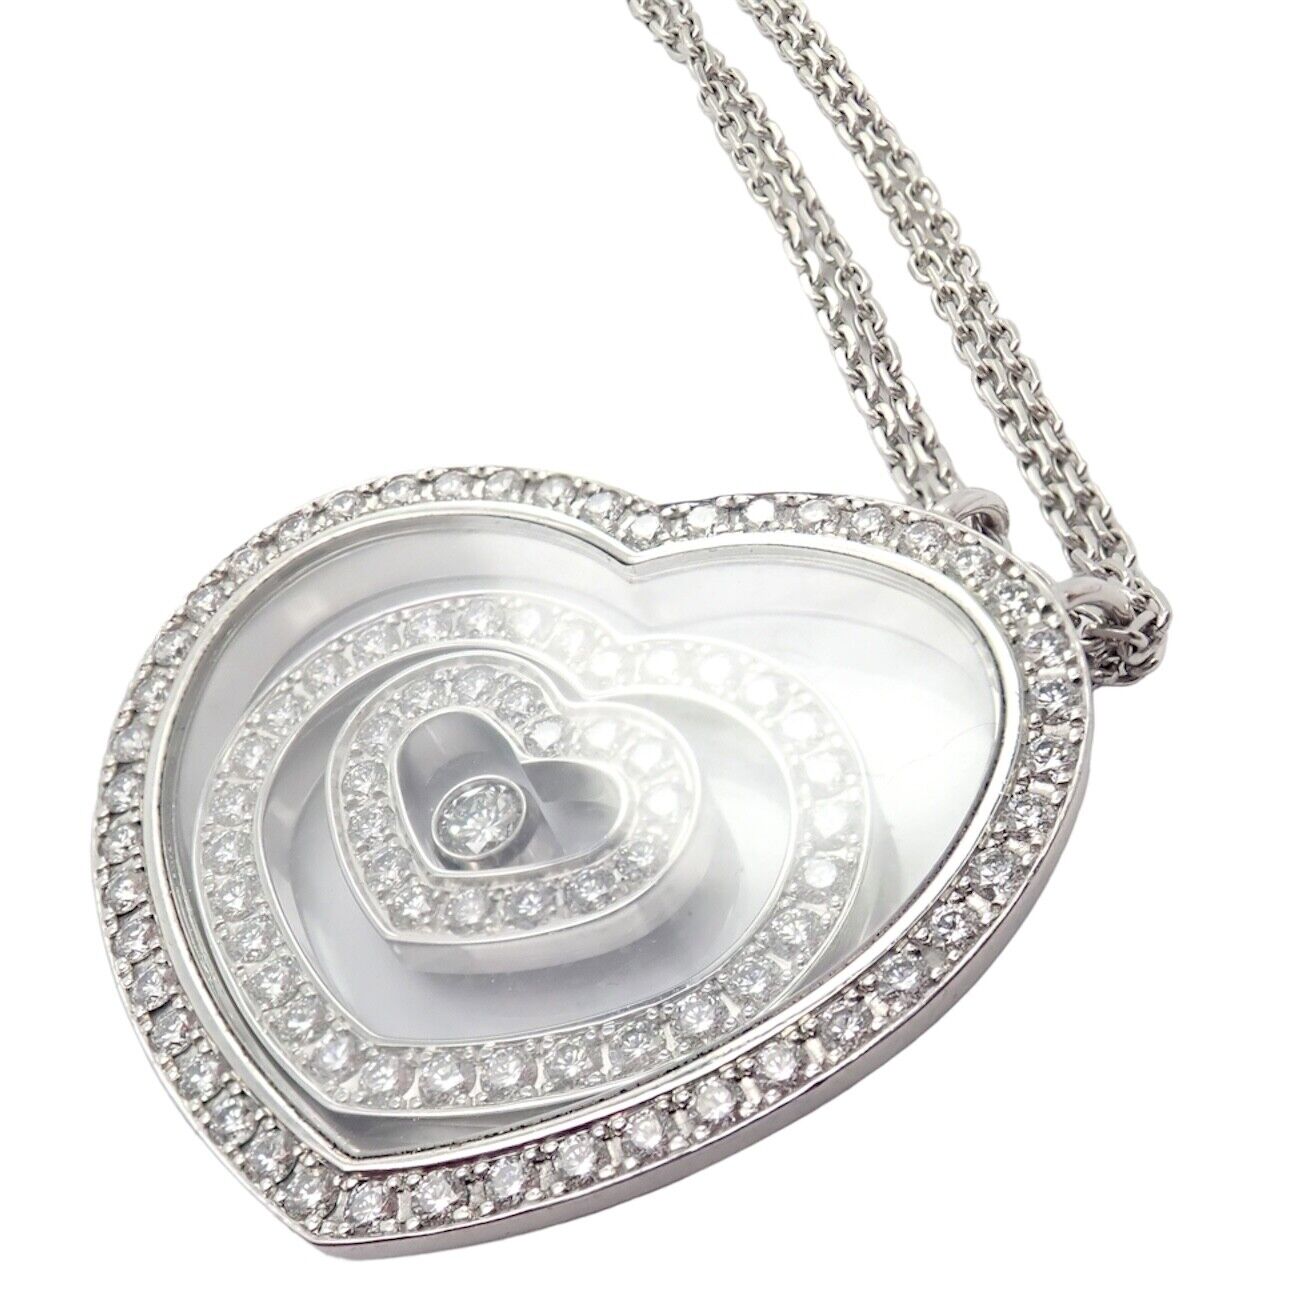 Chopard Jewelry & Watches:Fine Jewelry:Necklaces & Pendants Authentic! Chopard 18k White Gold Large Happy Spirit Heart Diamond Necklace